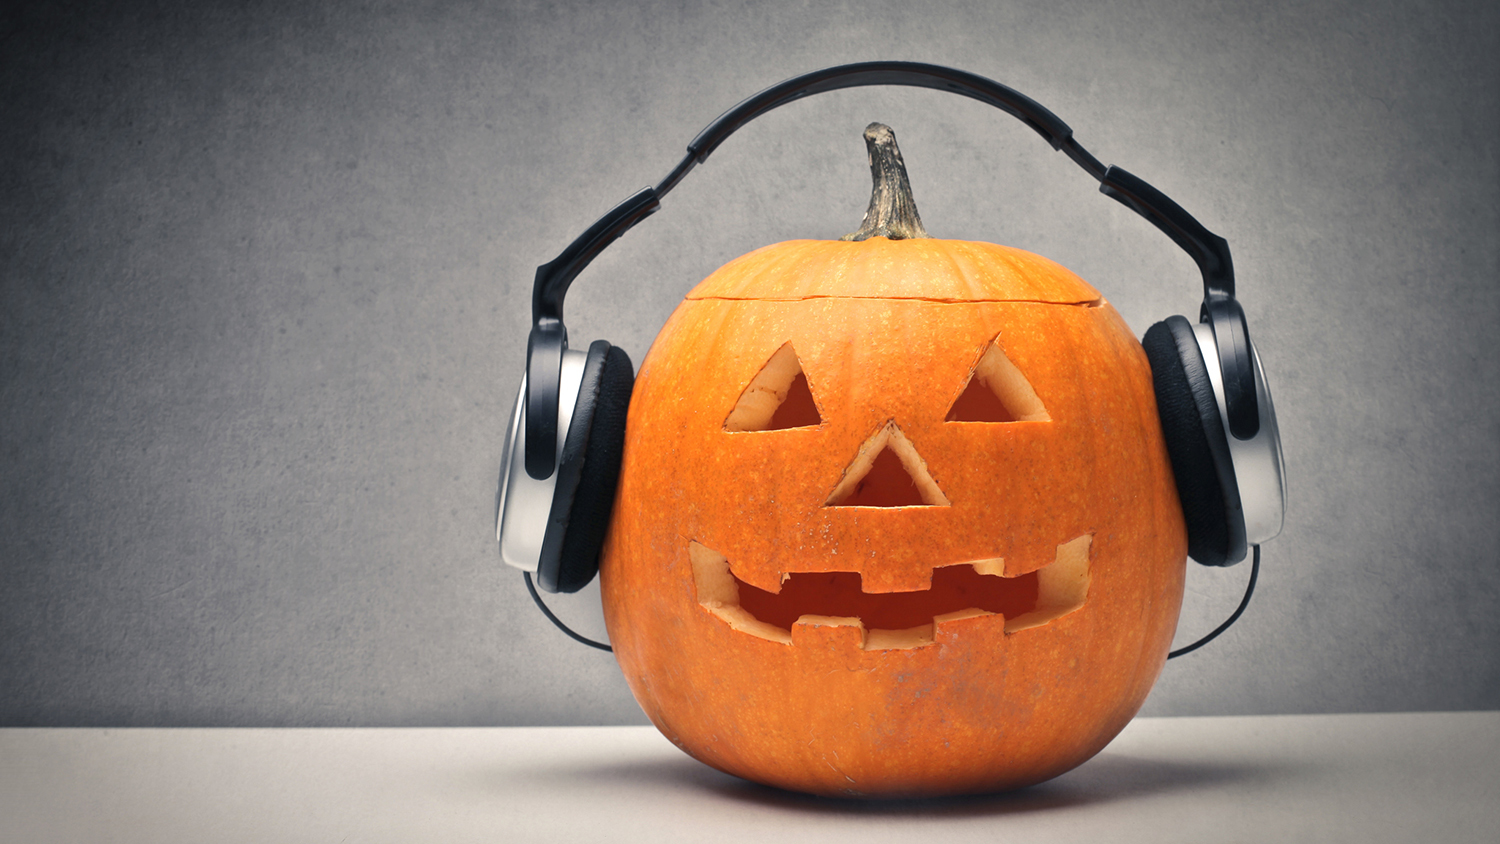 You got 10 out of 20! Are You a Halloween Hitmaster? 🎃 Test Your Spooky Song Knowledge in This Halloween Music Quiz